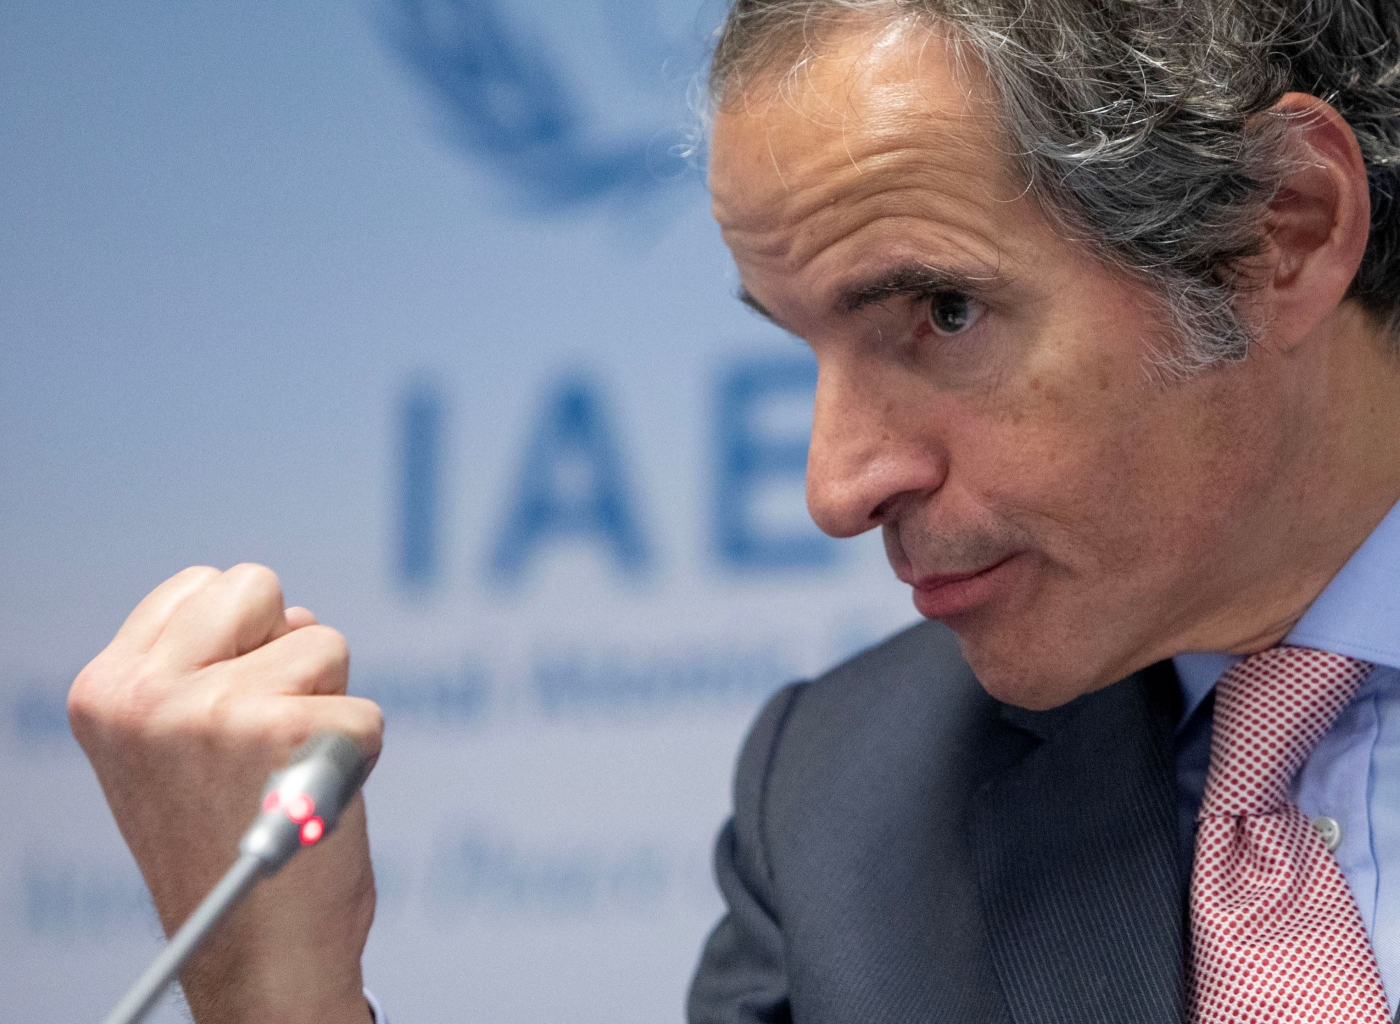 Rafael Grossi, Director General of the International Atomic Energy Agency (IAEA), speaks to journalists after the IAEA's Board of Governors' meeting at the agency's headquarters in Vienna, Austria on March 6, 2023 (AFP)